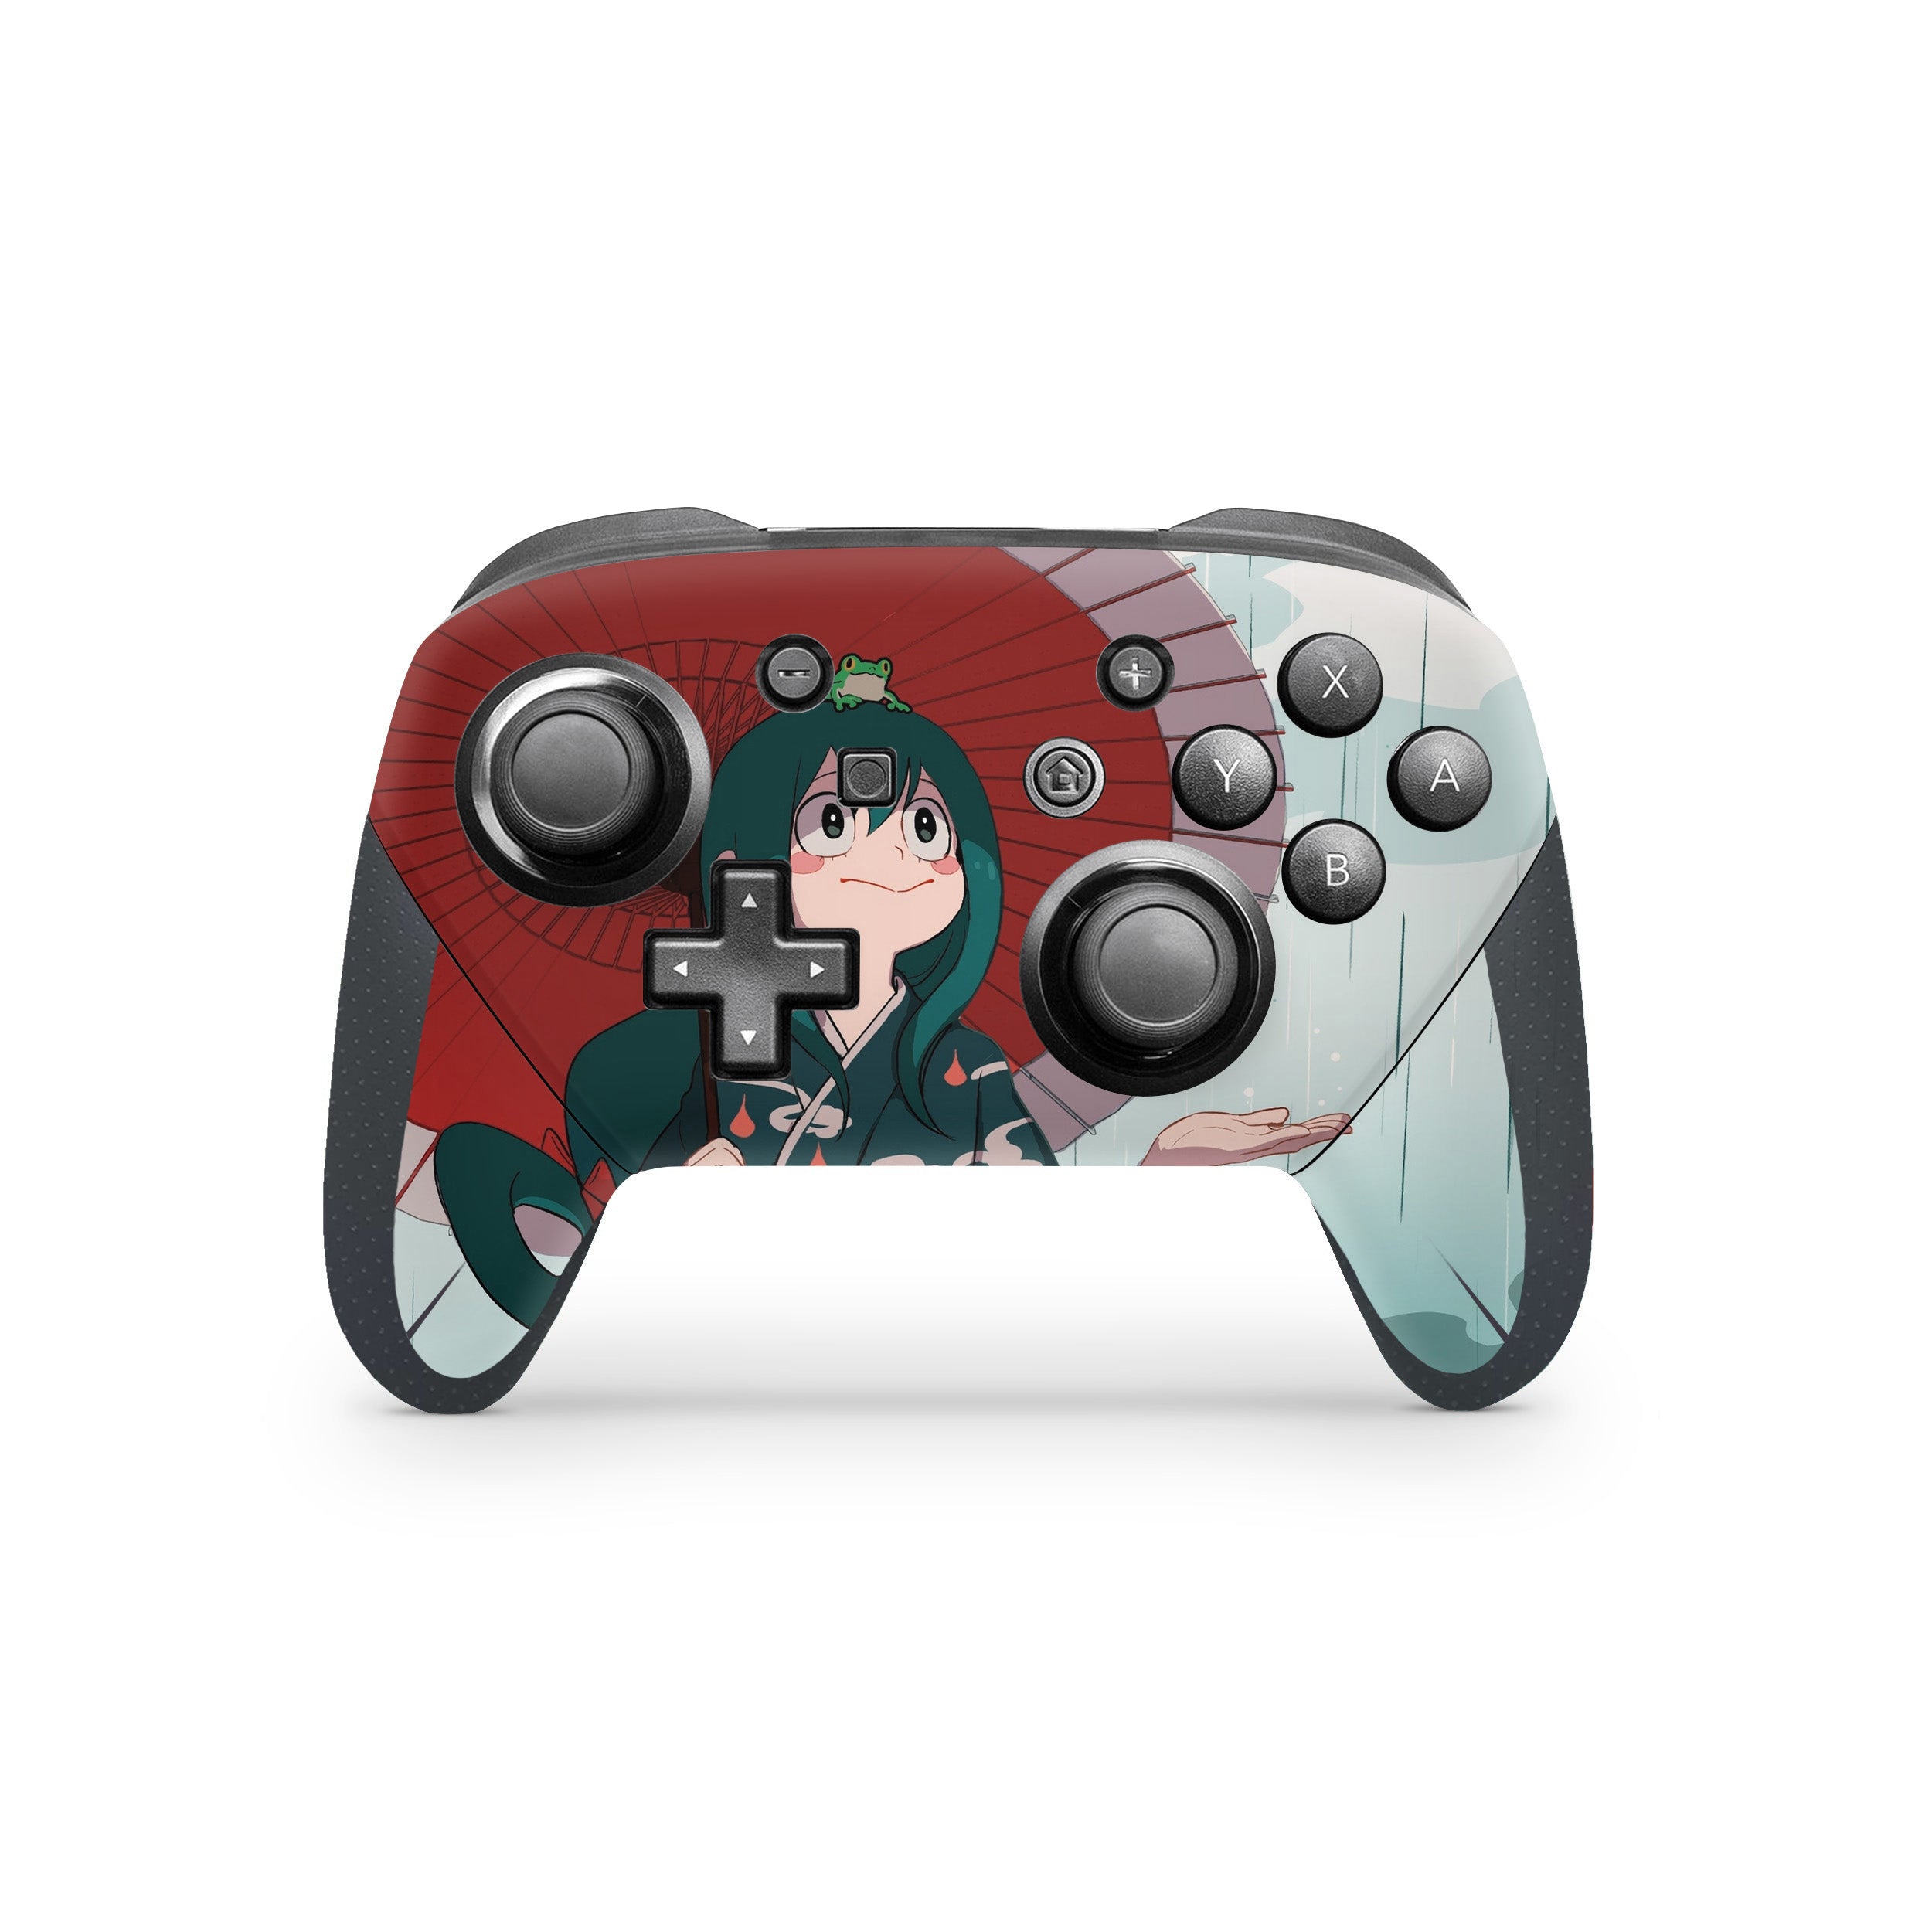 A video game skin featuring a My Hero Academia Tsuyu Asui design for the Switch Pro Controller.